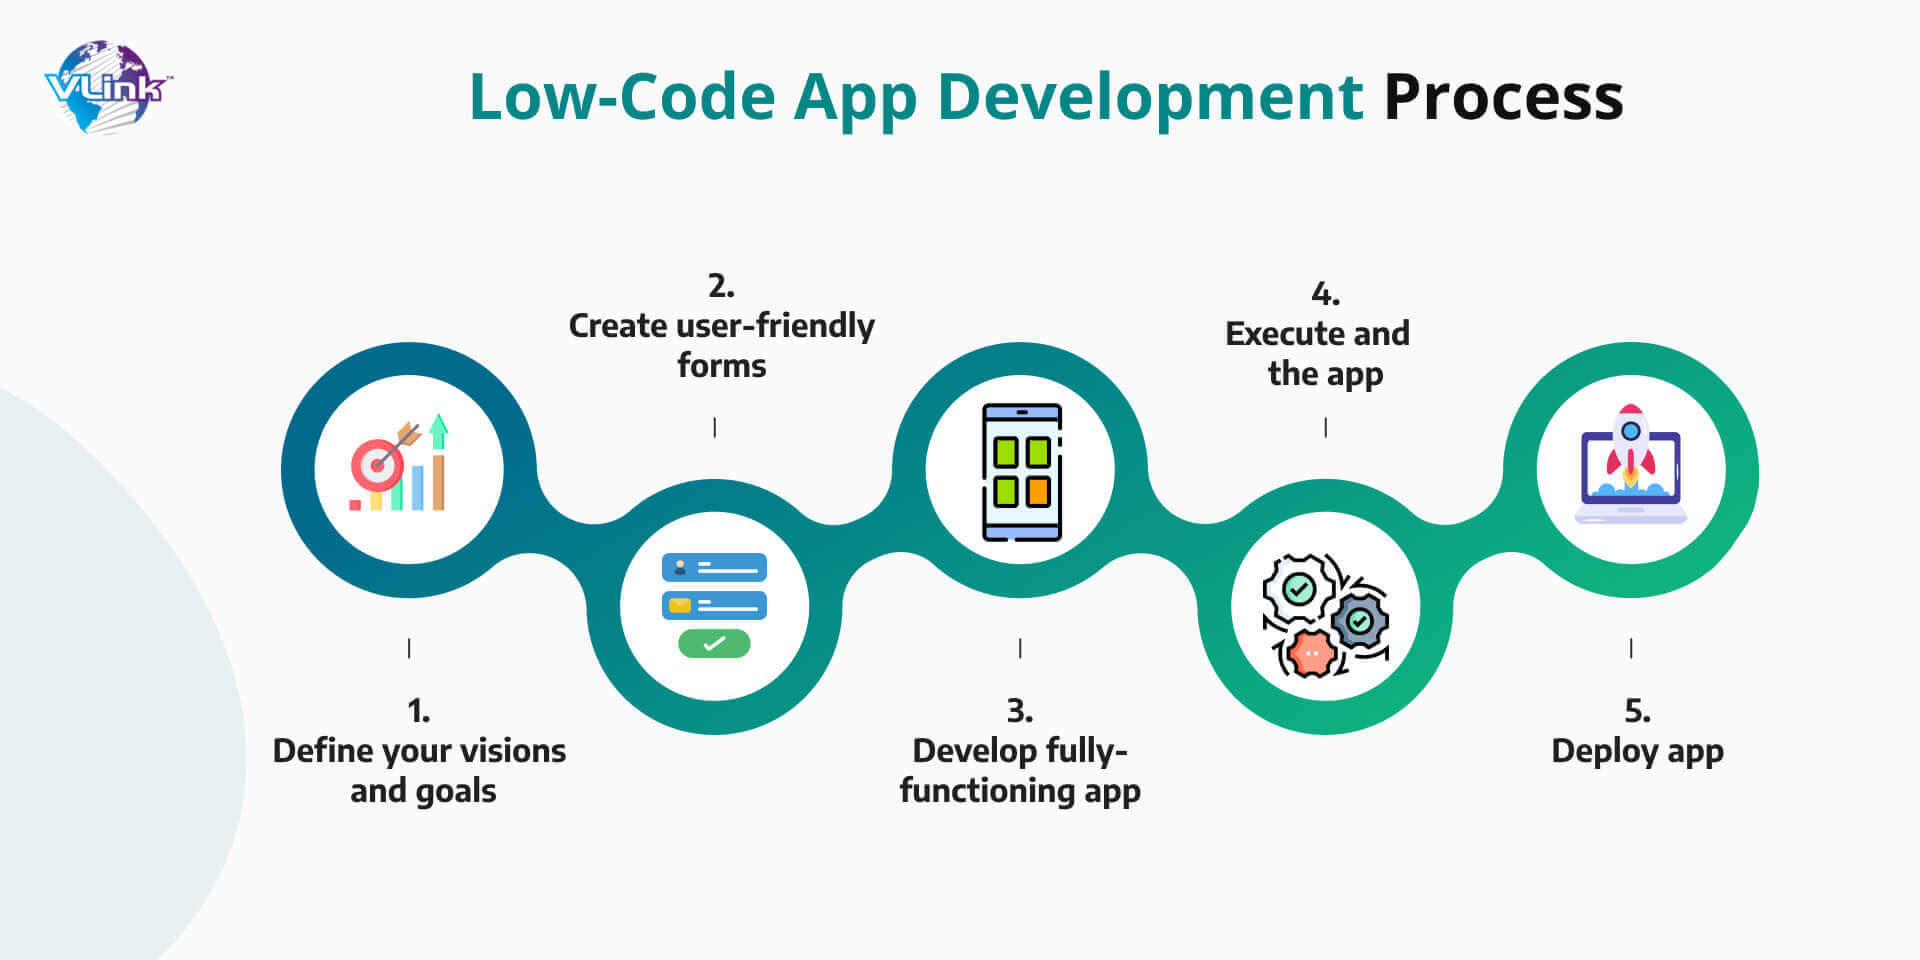 Step-By-Step Guide on Low-Code Application Development